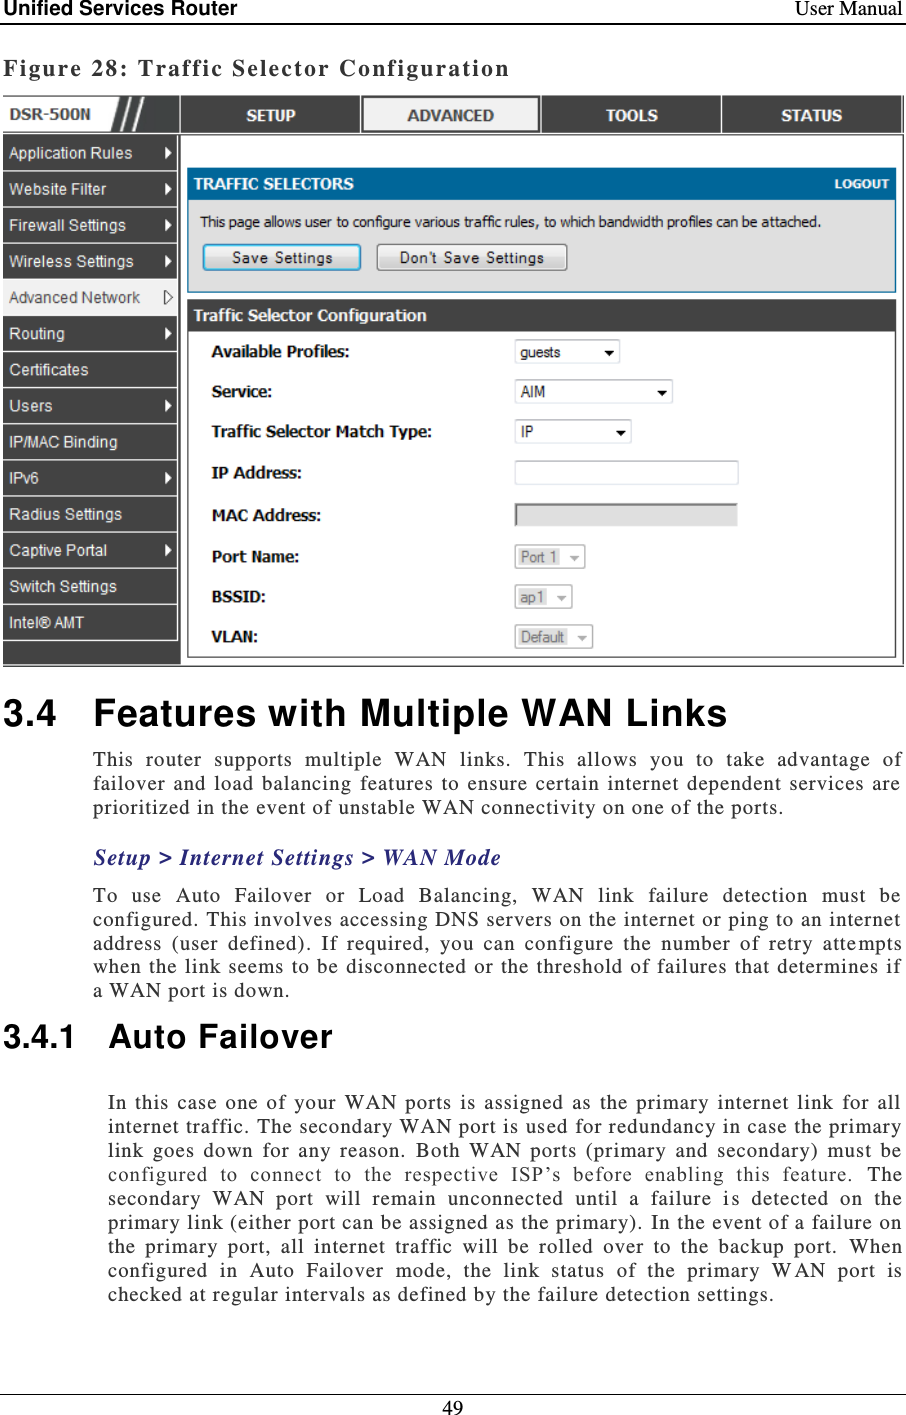 Unified Services Router    User Manual 49  Figure 28: Traf fic Selector Configuration   3.4  Features with Multiple WAN Links This  router  supports  multiple  WAN  links.  This  allows  you  to  take  advantage  of failover  and  load  balancing  features  to  ensure  certain  internet  dependent  services  are prioritized in the event of unstable WAN connectivity on one of the ports.   Setup &gt; Internet Settings &gt; WAN Mode To  use  Auto  Failover  or  Load  Balancing,  WAN  link  failure  detection  must  be configured. This involves accessing DNS servers on the internet or ping to an internet address  (user  defined).  If  required,  you  can  configure  the  number  of  retry  atte mpts when the  link seems to be  disconnected  or the threshold of failures  that  determines if a WAN port is down. 3.4.1  Auto Failover In  this  case  one  of  your  WAN  ports  is  assigned  as  the  primary  internet  link  for  all internet traffic. The secondary WAN port is used for redundancy in case the primary link  goes  down  for  any  reason.  Both  WAN  ports  (primary  and  secondary)  must  be configured  to  connect  to  the  respective  ISP’s  before  enabling  this  feature.   The secondary  WAN  port  will  remain  unconnected  until  a  failure  i s  detected  on  the primary link (either port can be assigned as the primary).  In the event of a failure on the  primary  port,  all  internet  traffic  will  be  rolled  over  to  the  backup  port.   When configured  in  Auto  Failover  mode,  the  link  status  of  the  primary  W AN  port  is checked at regular intervals as defined by the failure detection settings.  